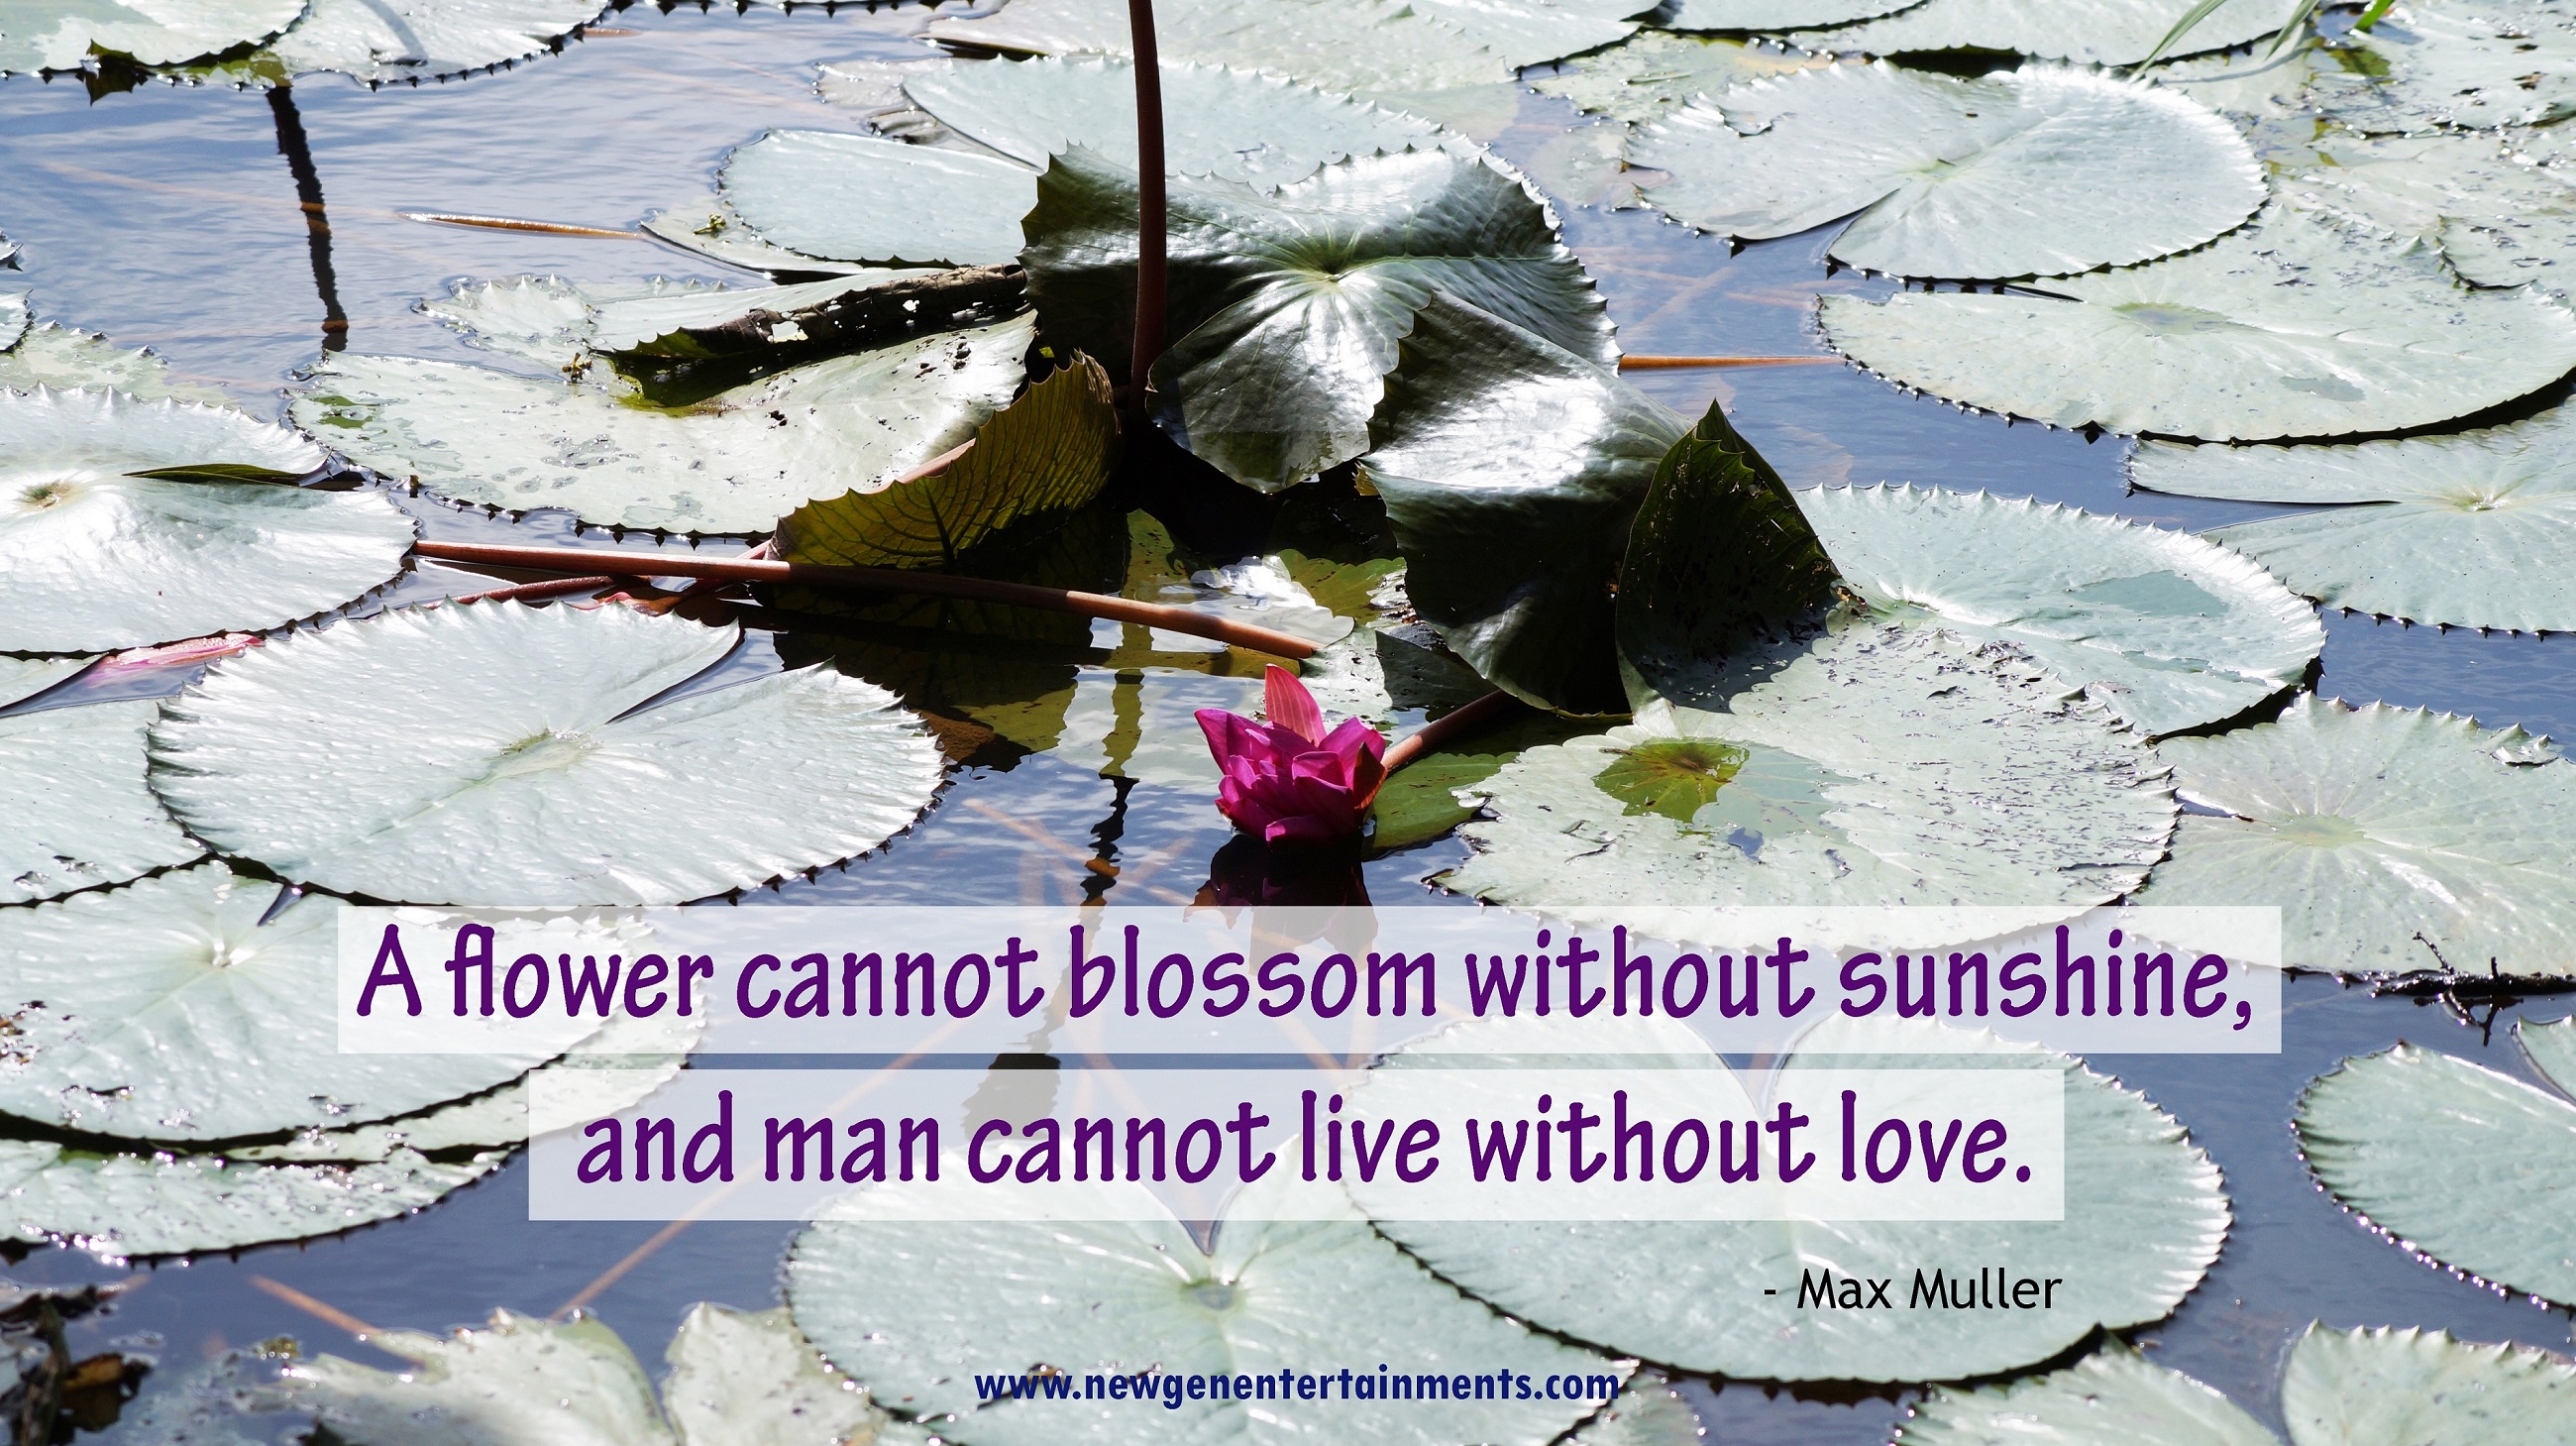 A flower cannot blossom without sunshine, and man cannot live without love